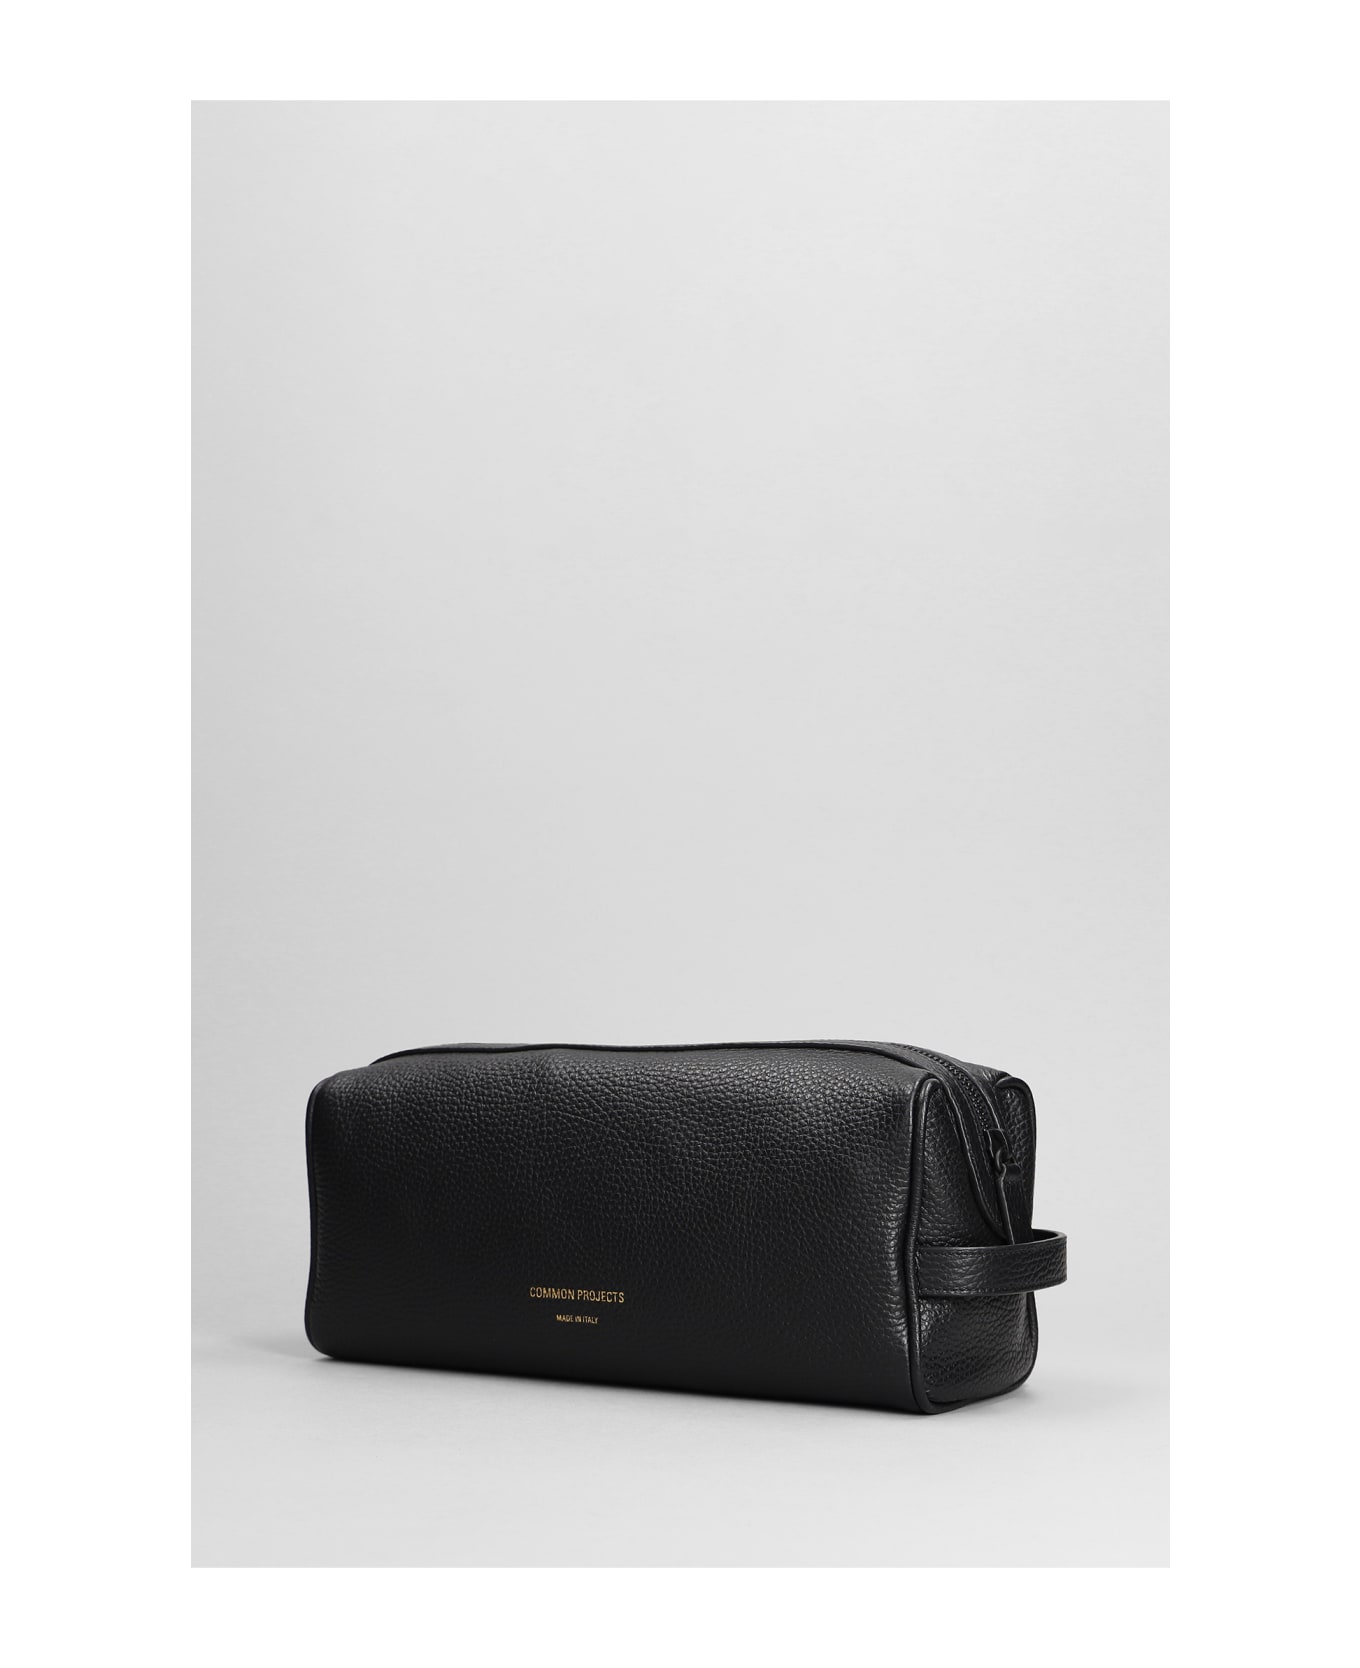 Common Projects Clutch In Black Leather - black